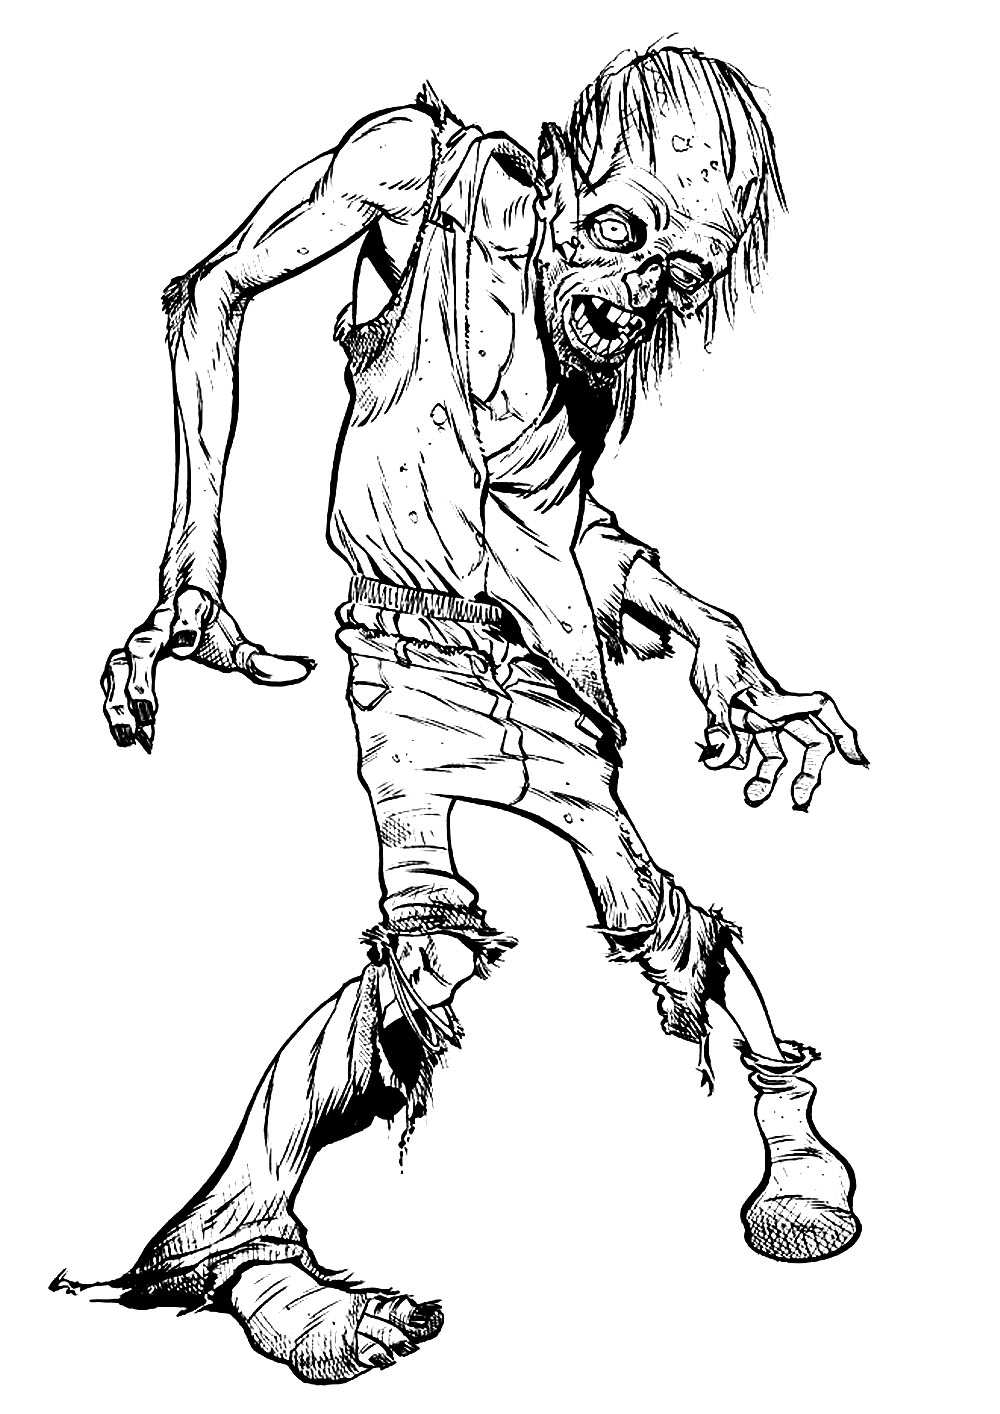 Zombie walking   Halloween Adult Coloring Pages